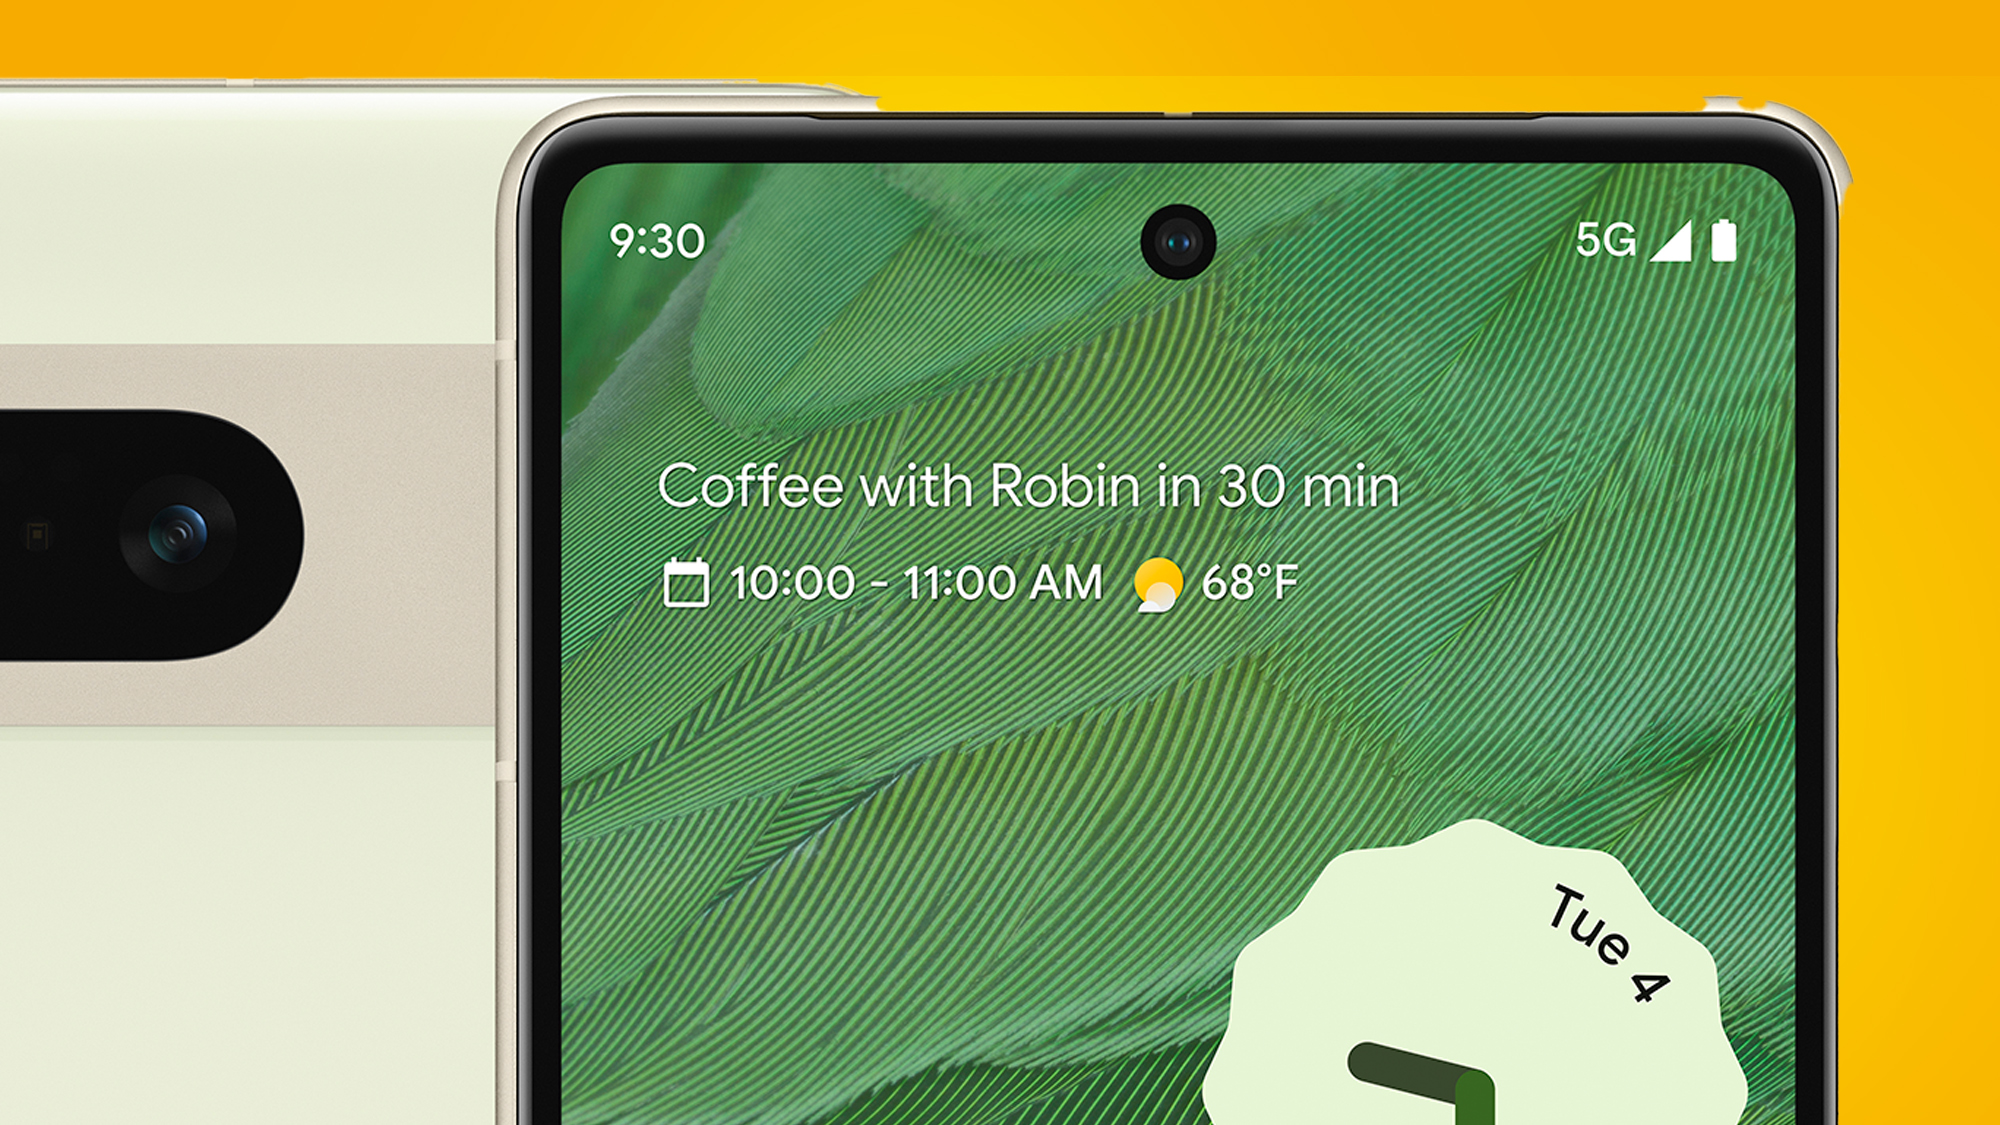 The Google Pixel 7 phone on a yellow background